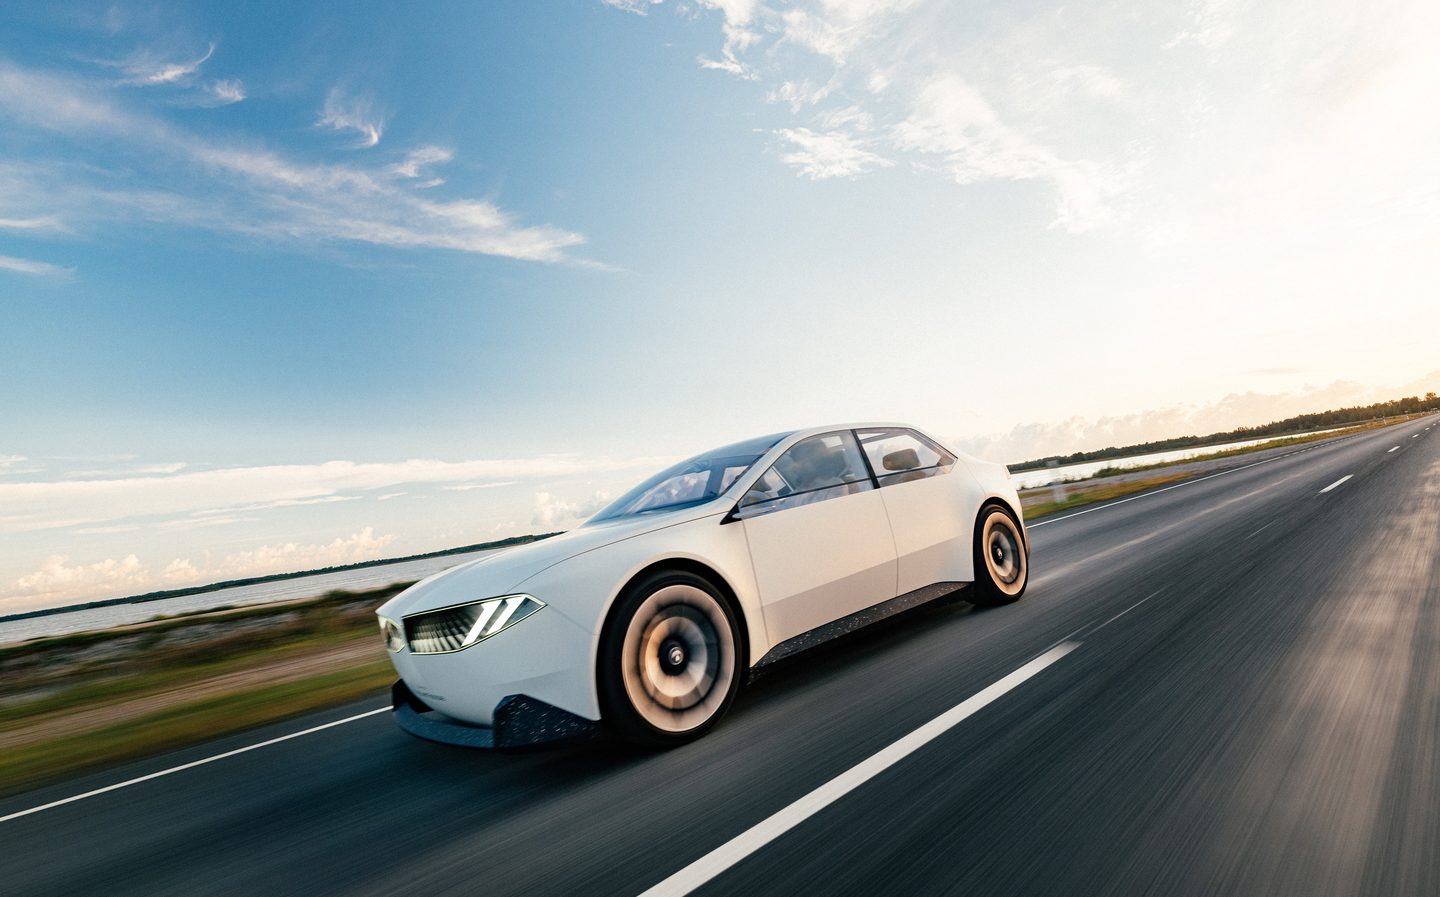 concept, electric cars, munich motor show, neue klasse, vision, bmw vision neue klasse concept offers a look at future 3 series with next-gen electric power